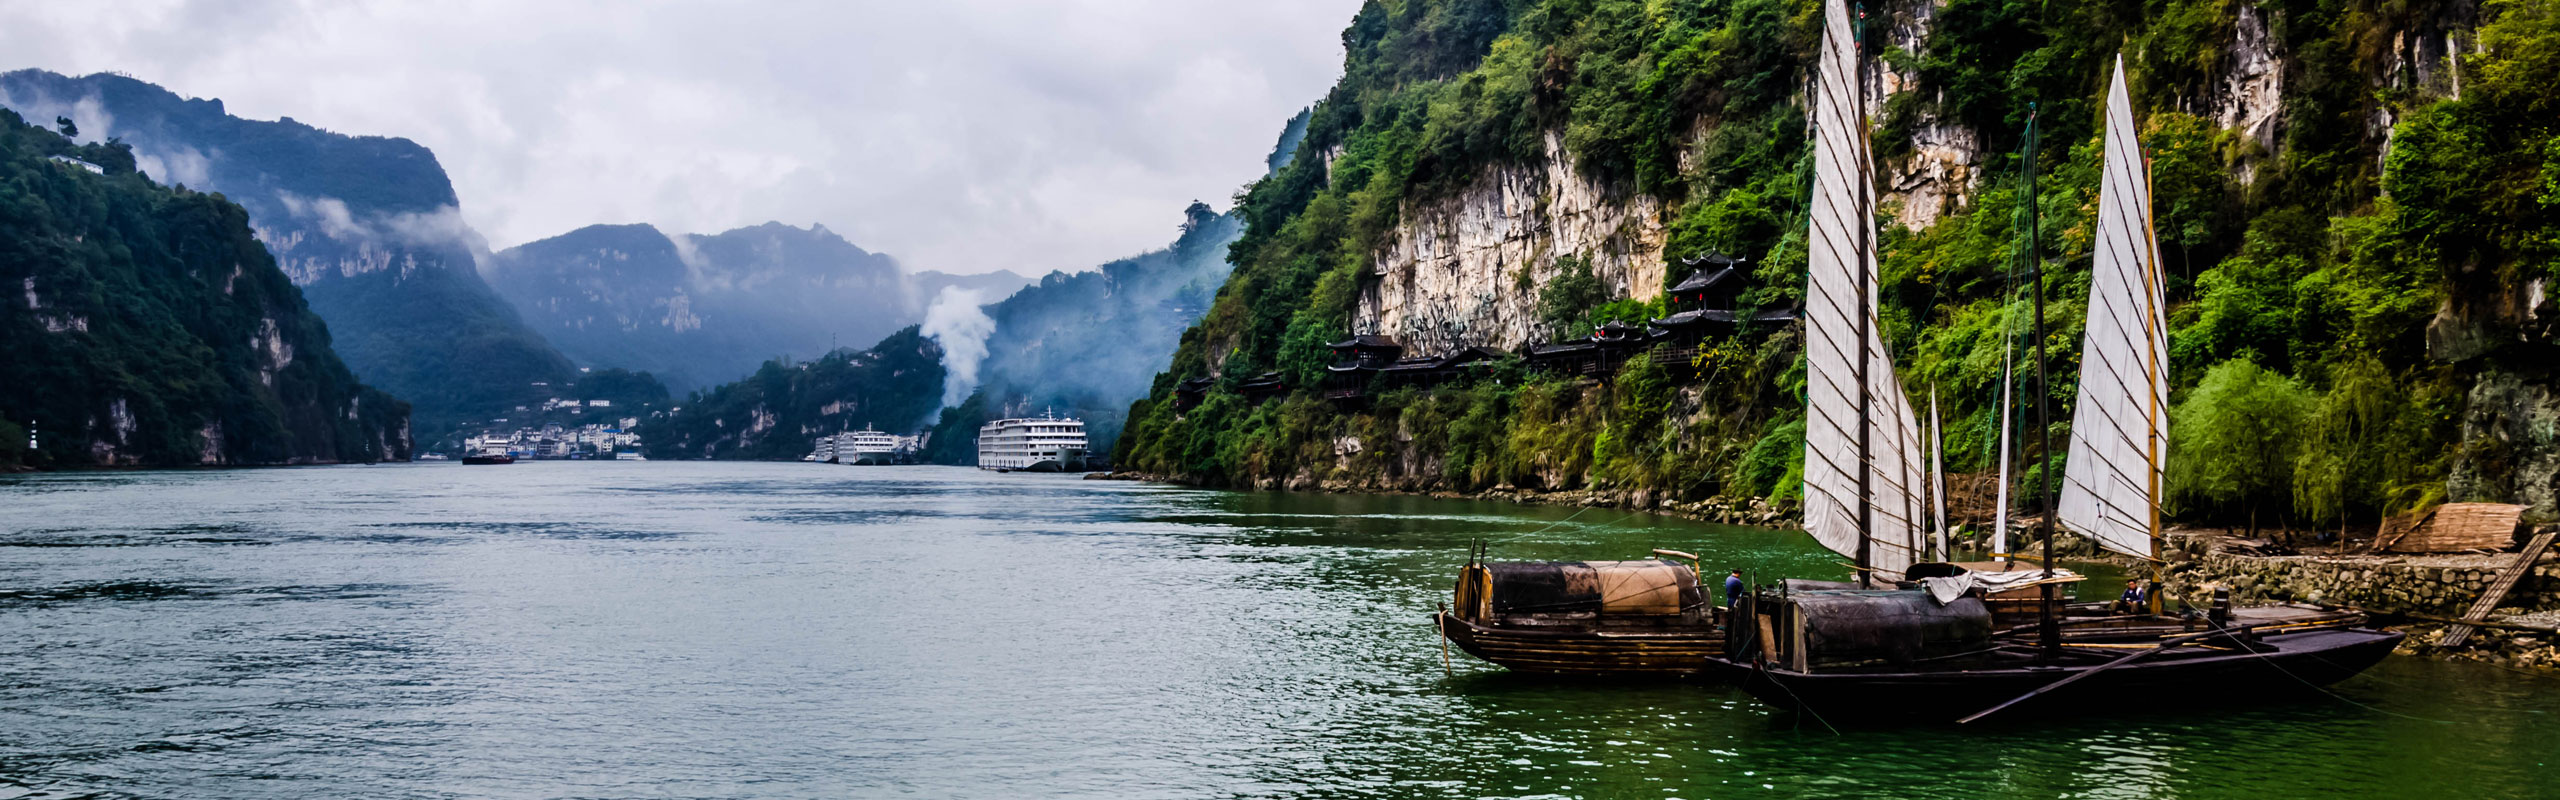 10-Day Essential China and Yangtze River Cruise